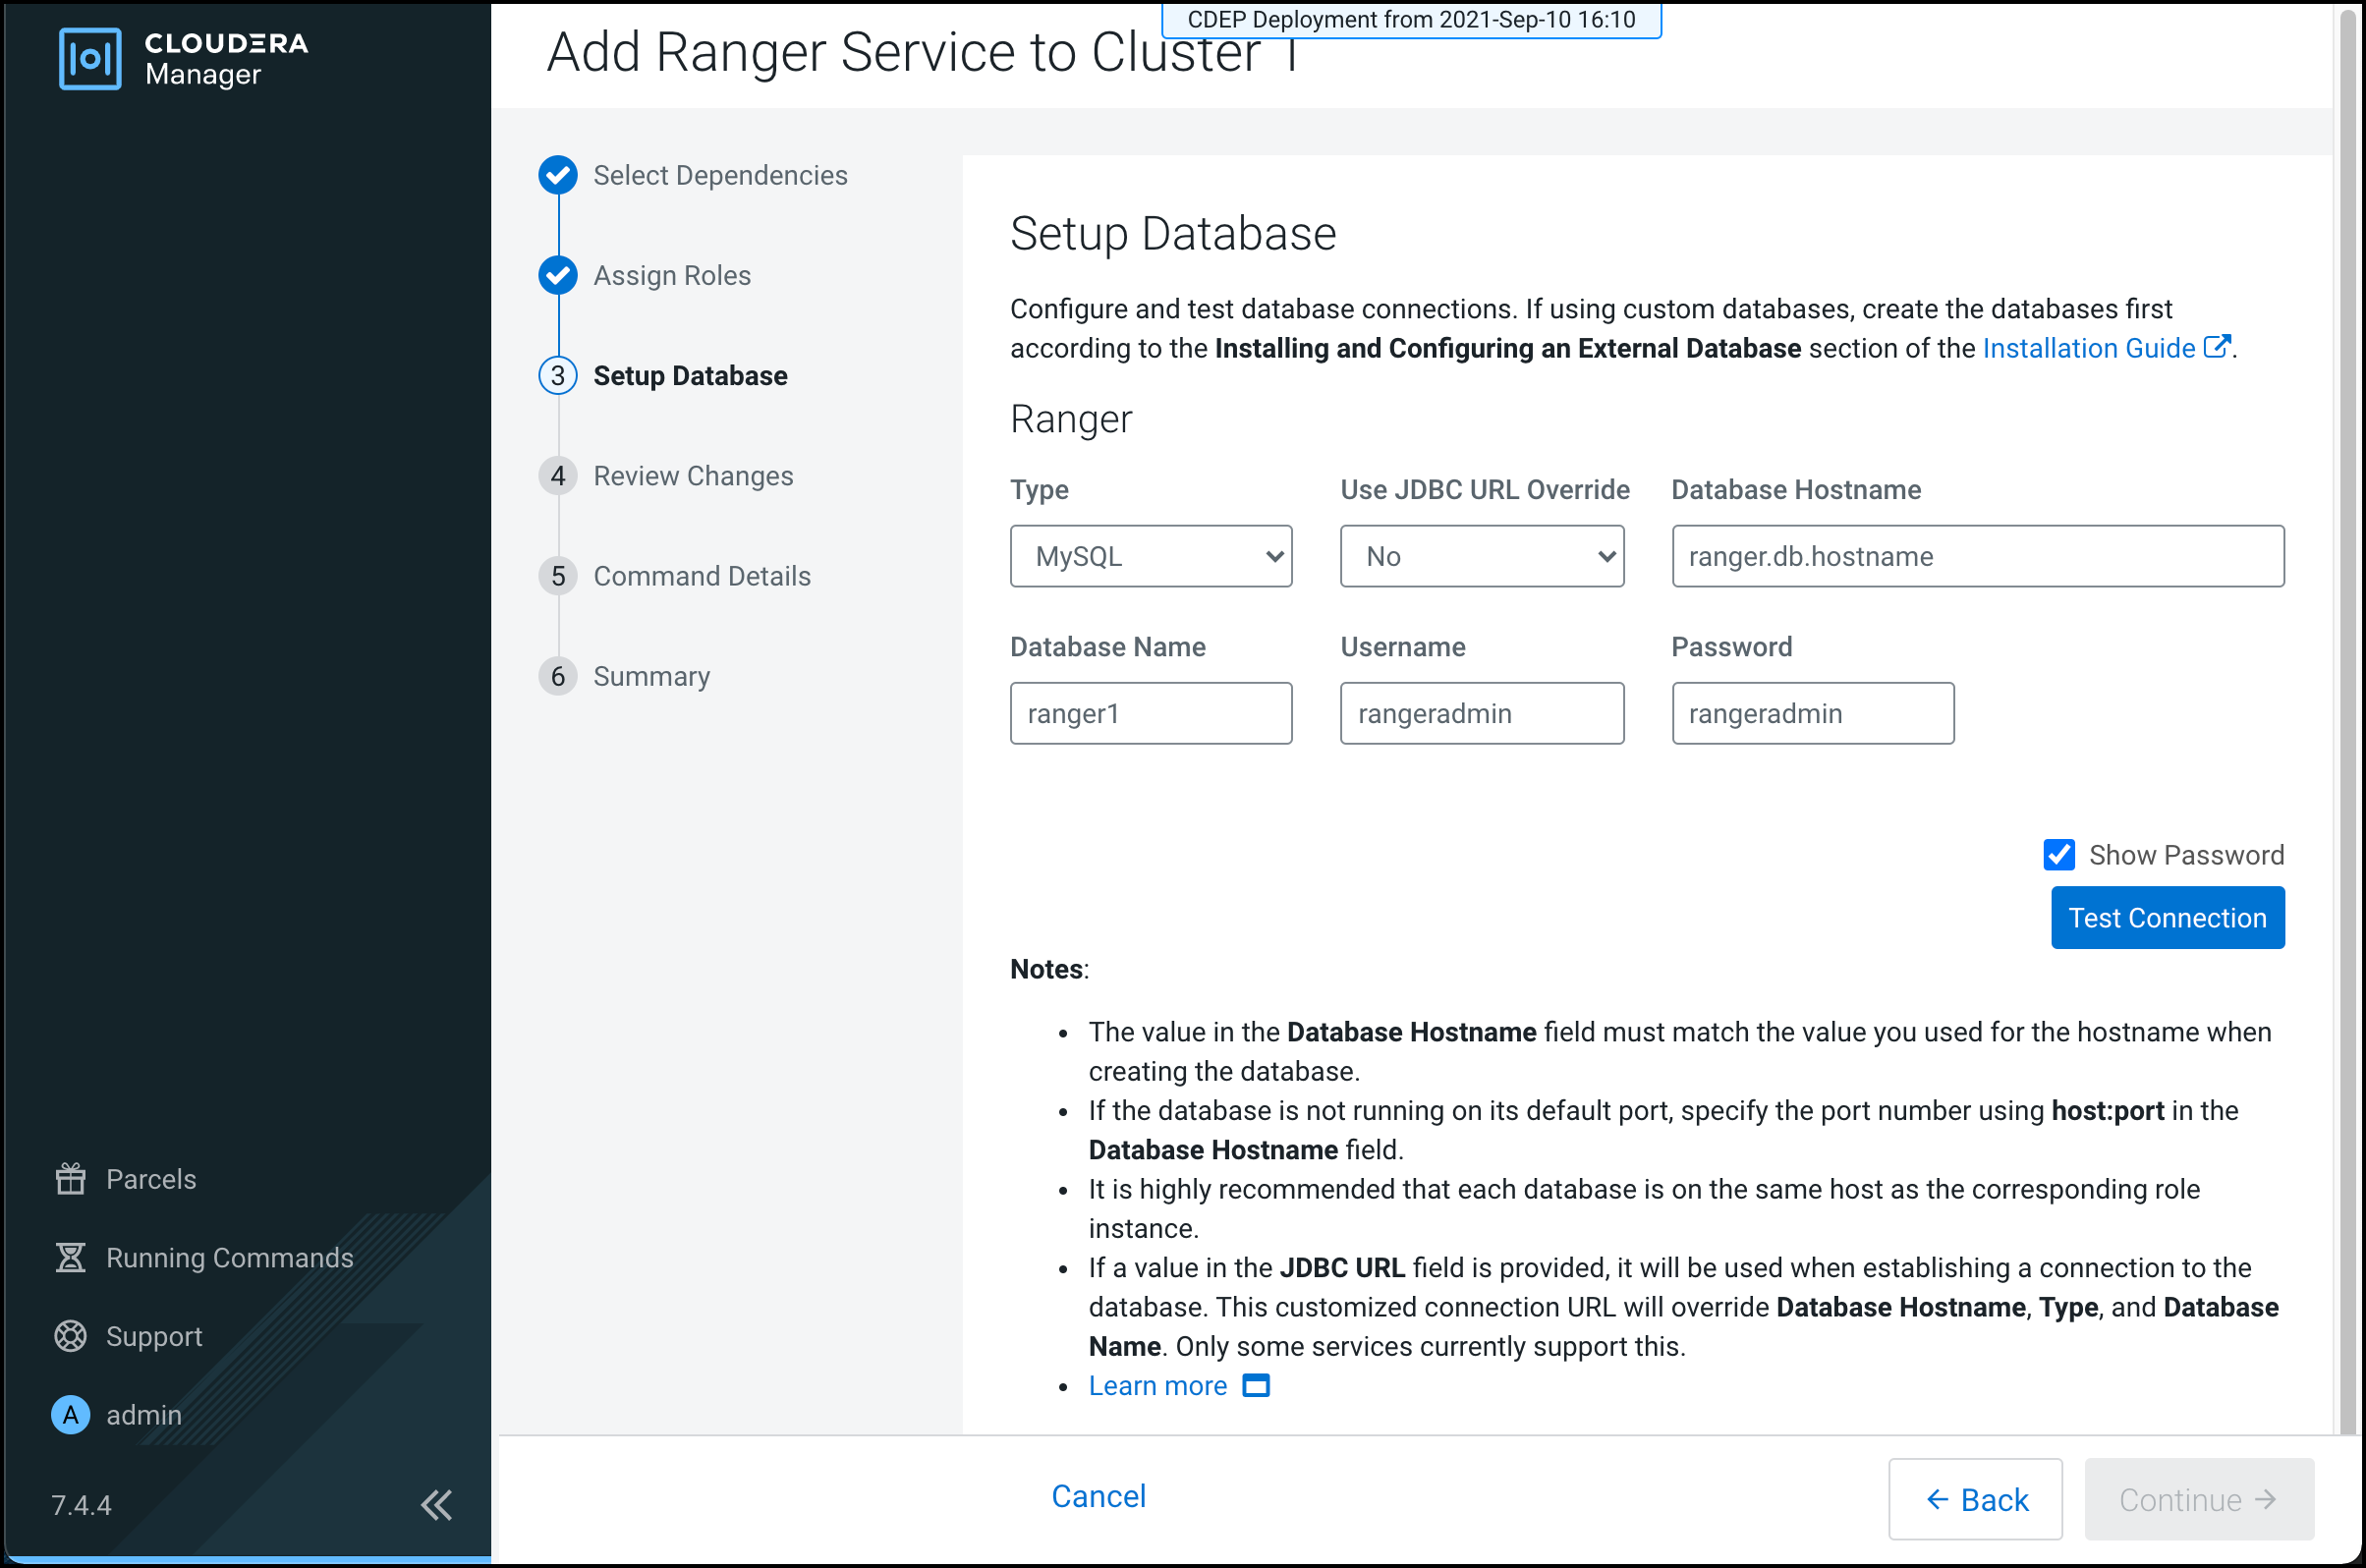 Adding Ranger service with an existing database